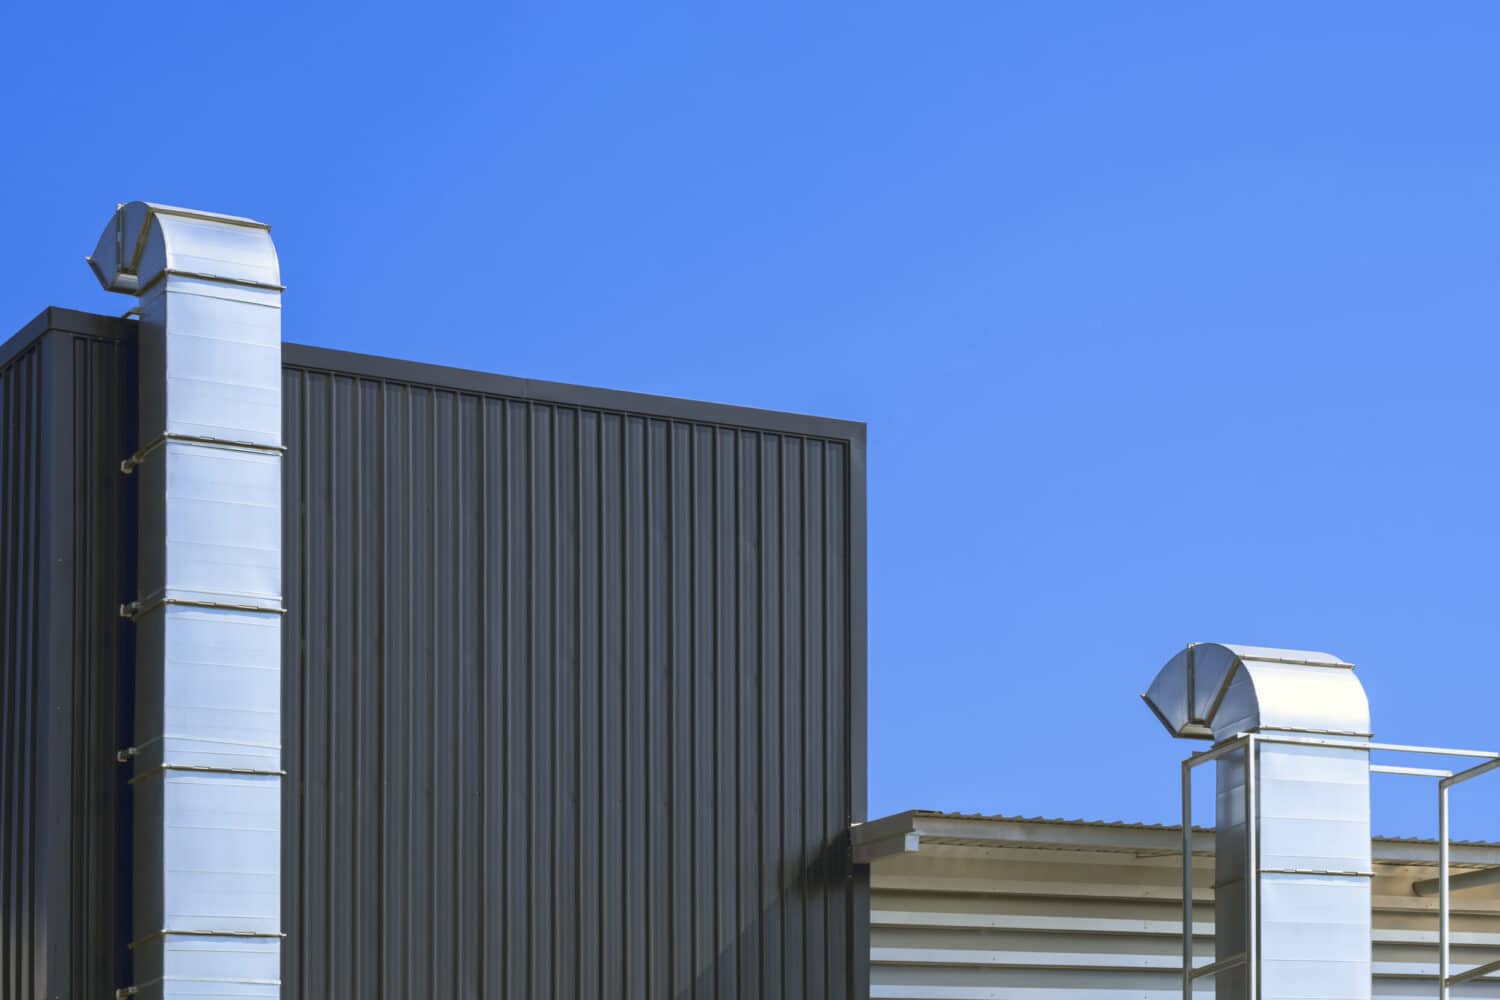 two air ventilation ducts outside modern industrial building against blue clear sky background scaled